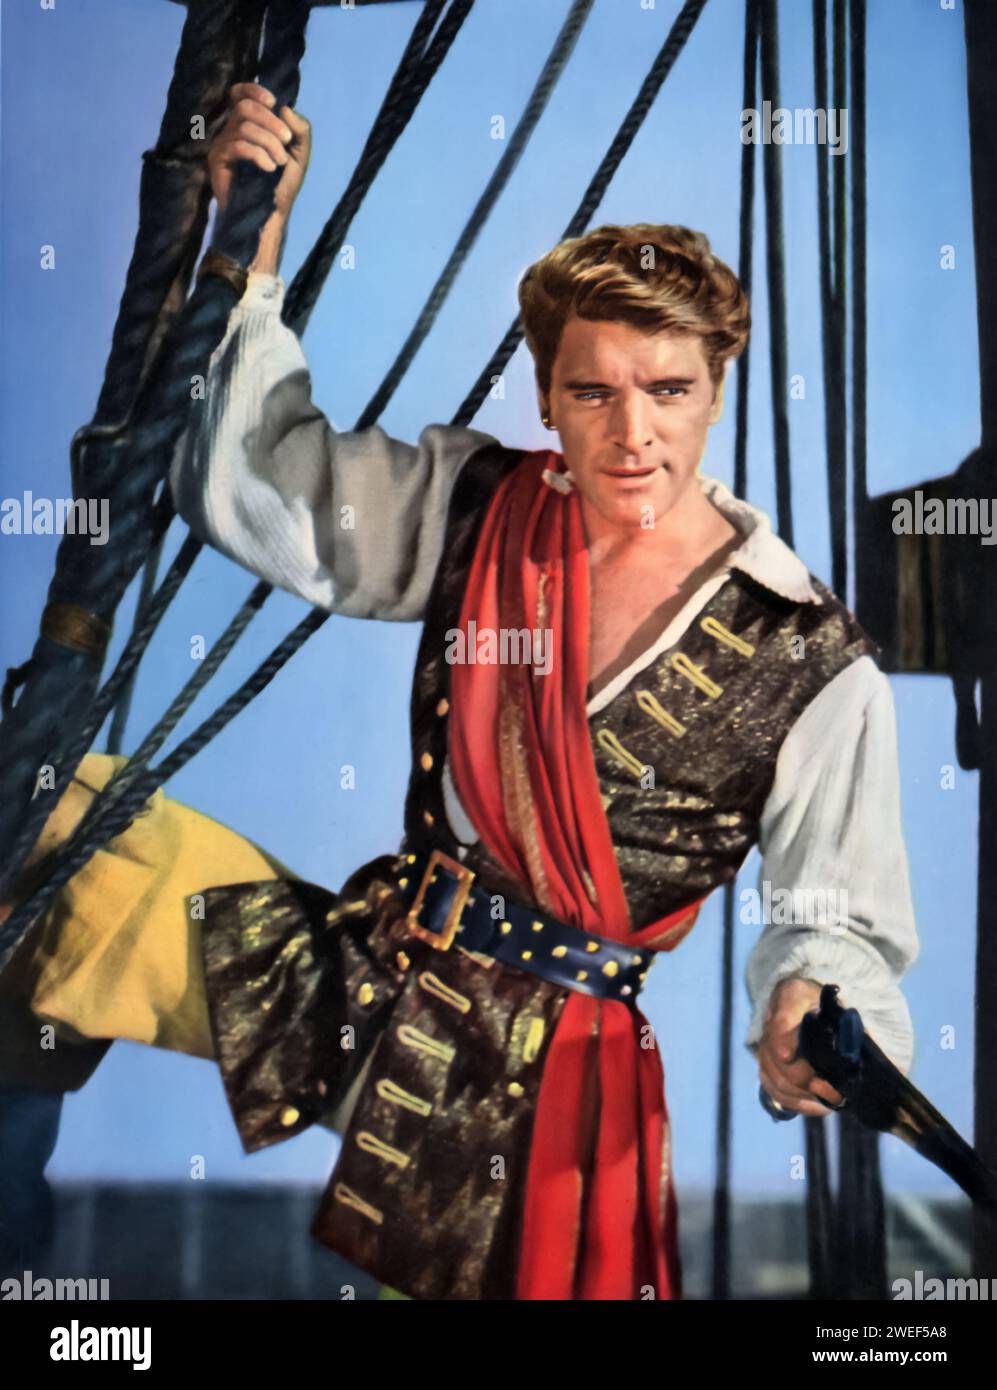 A portrait of Burt Lancaster, renowned for his dynamic role in 'The Crimson Pirate' (1952). In this swashbuckling adventure, Lancaster plays Captain Vallo, a charismatic and athletic pirate. The film is known for its action-packed sequences and Lancaster's acrobatic prowess, which he performed without stunt doubles. Stock Photo